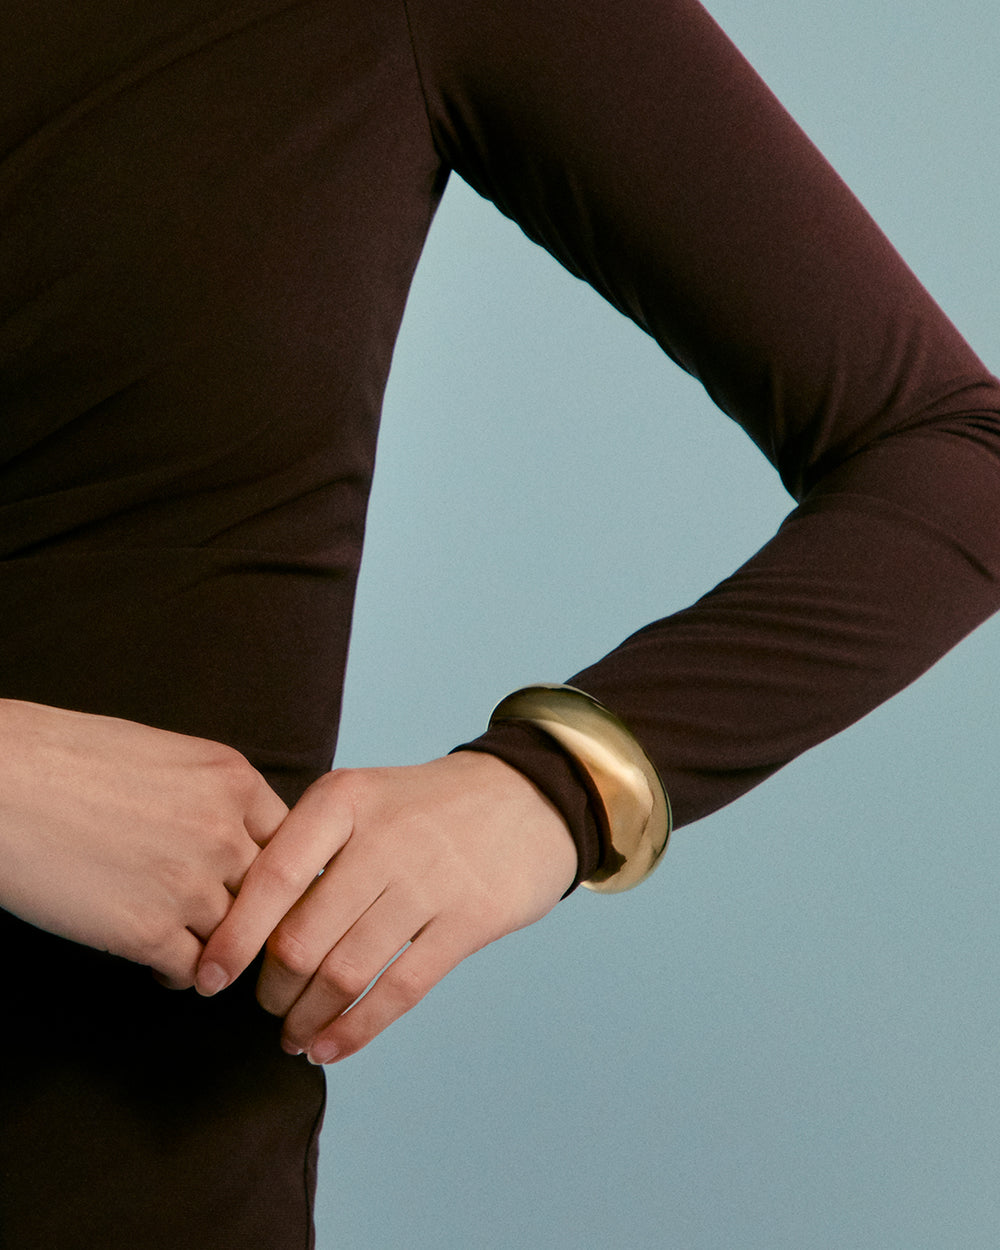 Person wearing a long sleeve shirt and a bracelet, hands clasped.